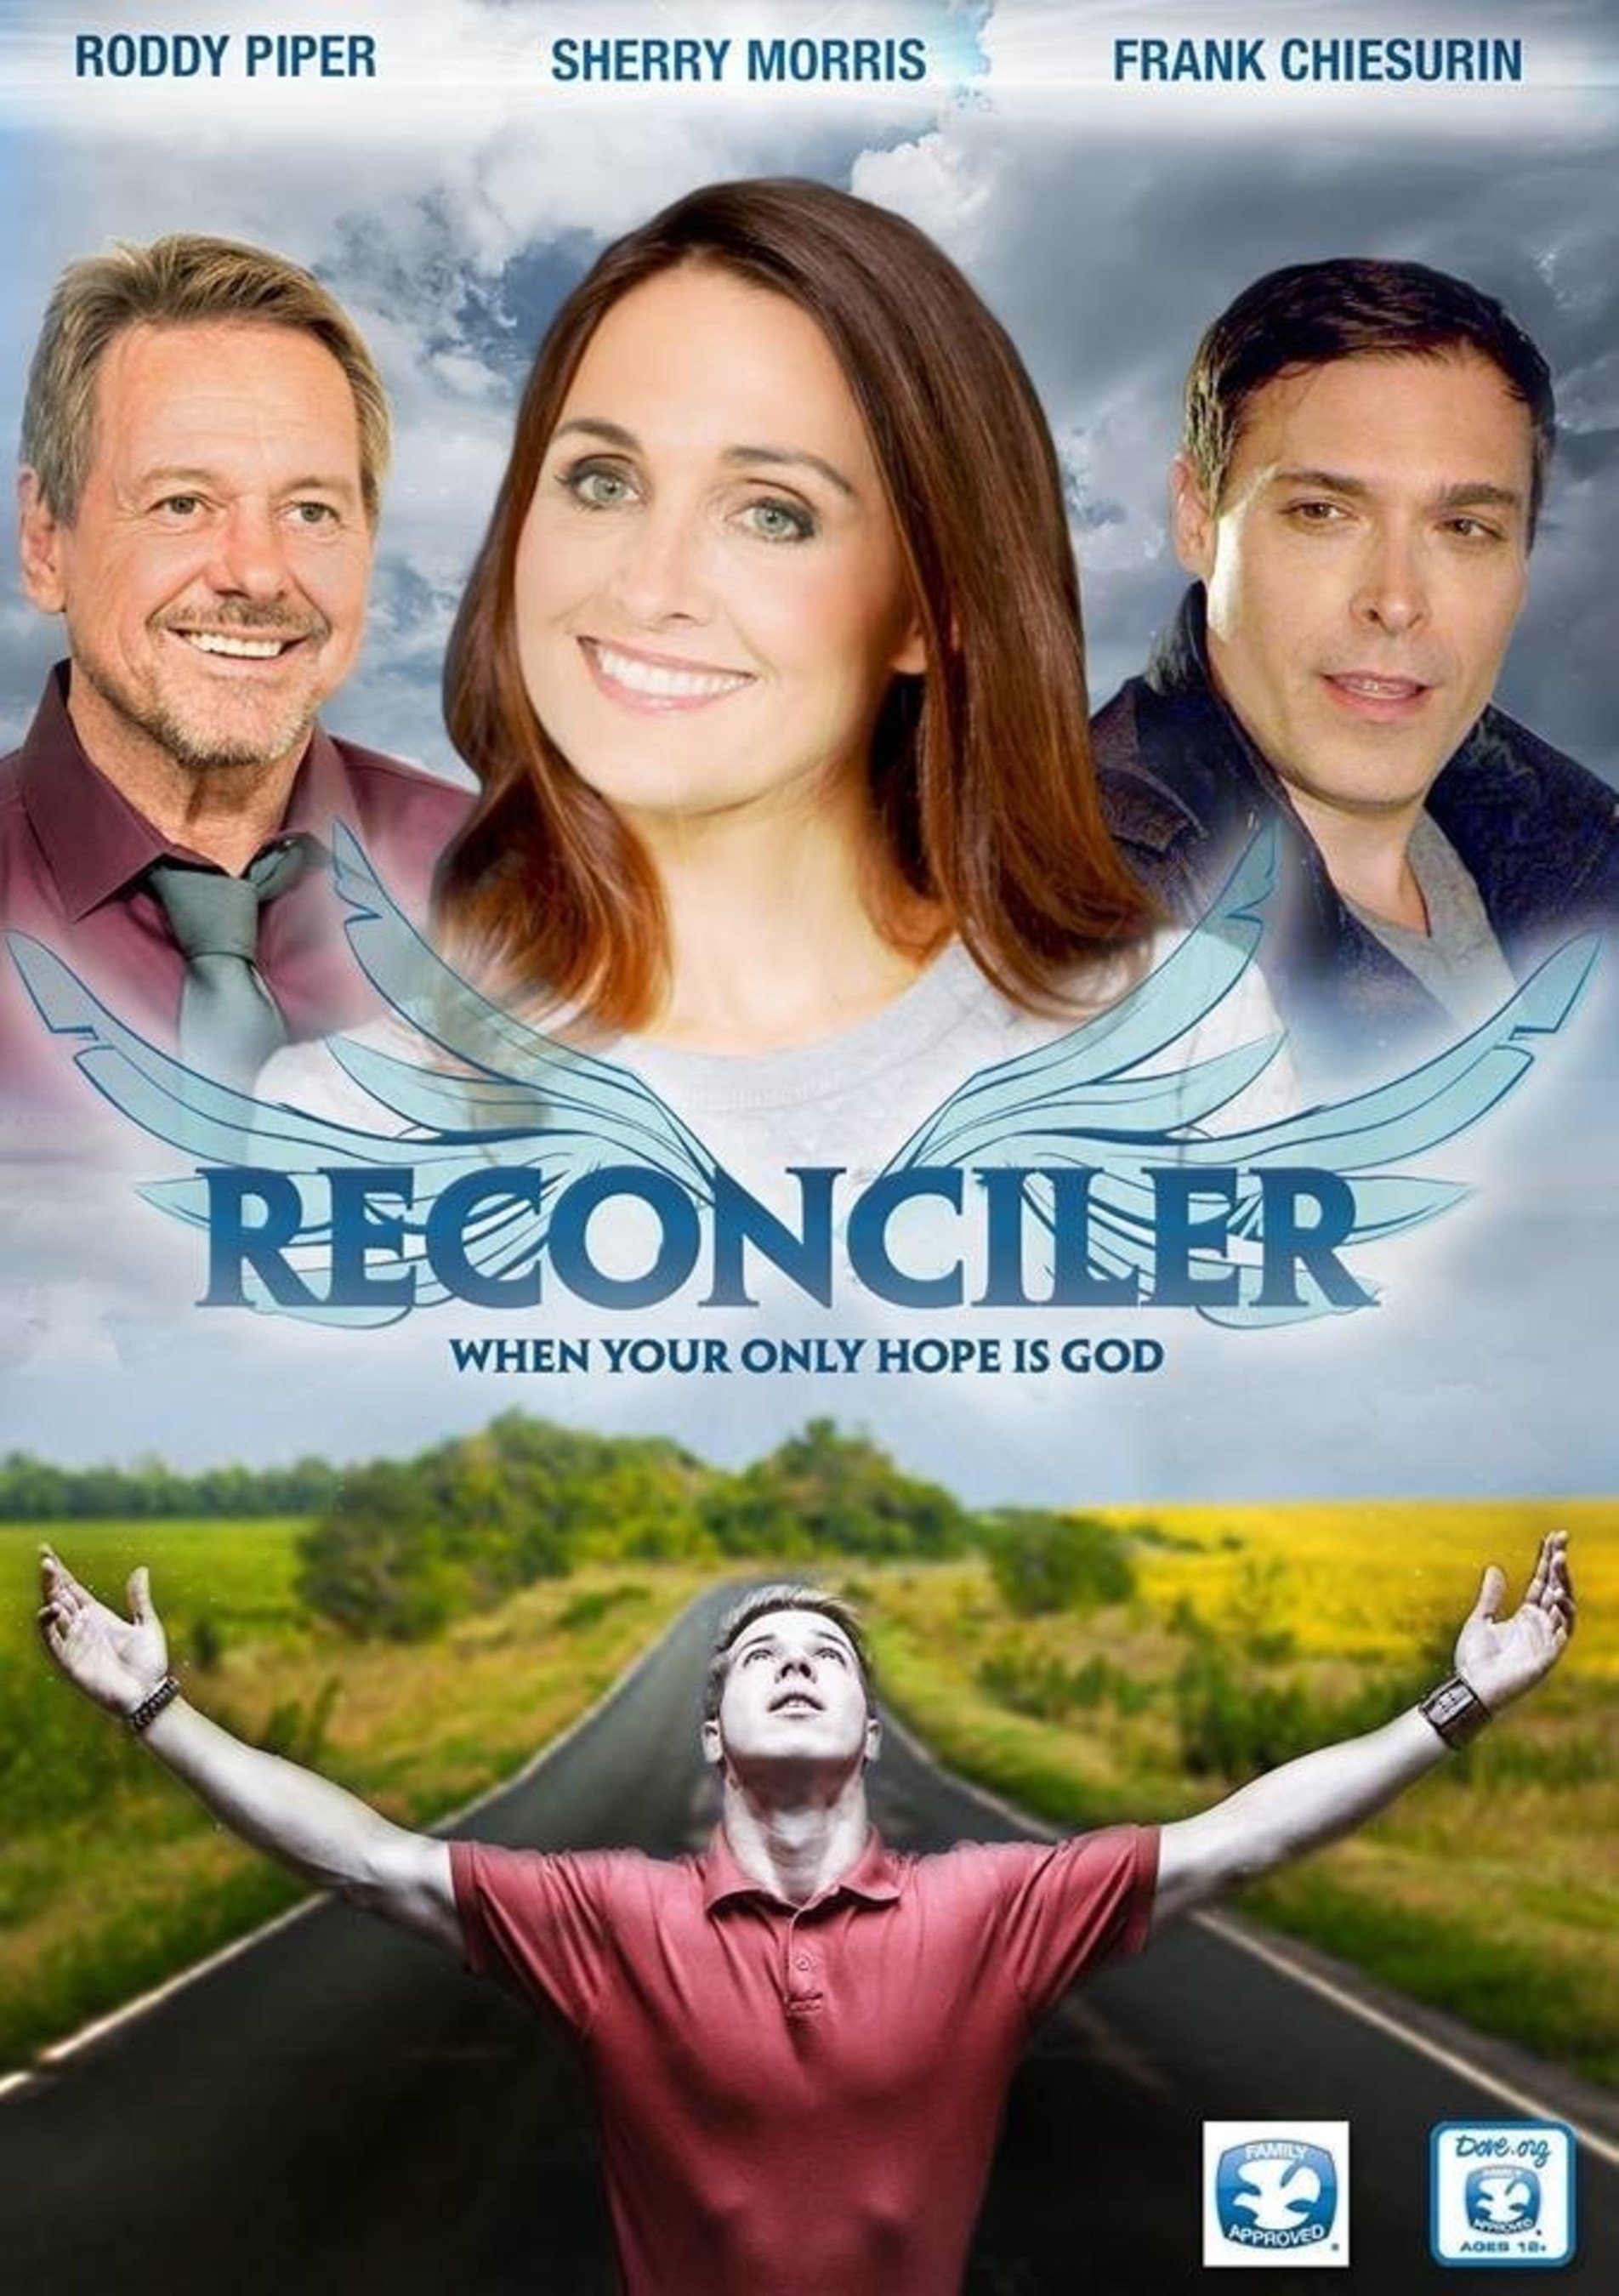 Roddy Piper's, the "Reconciler" Movie to Be Released Next Week.